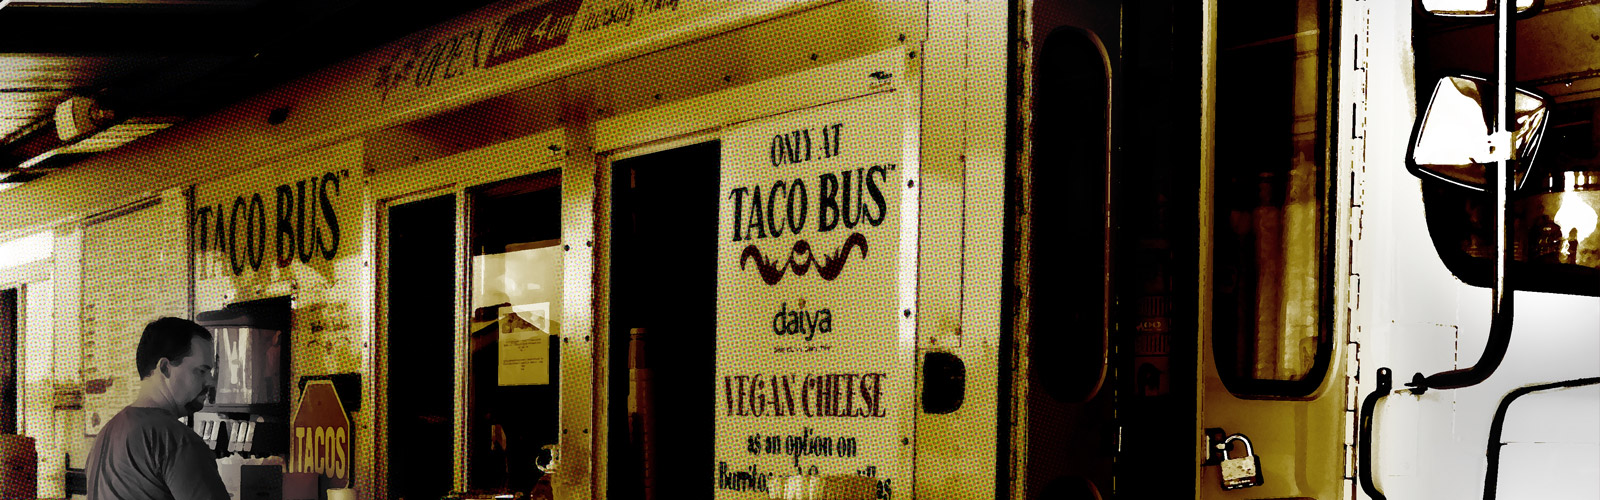 Taco Bus - Authentic Mexican Taste